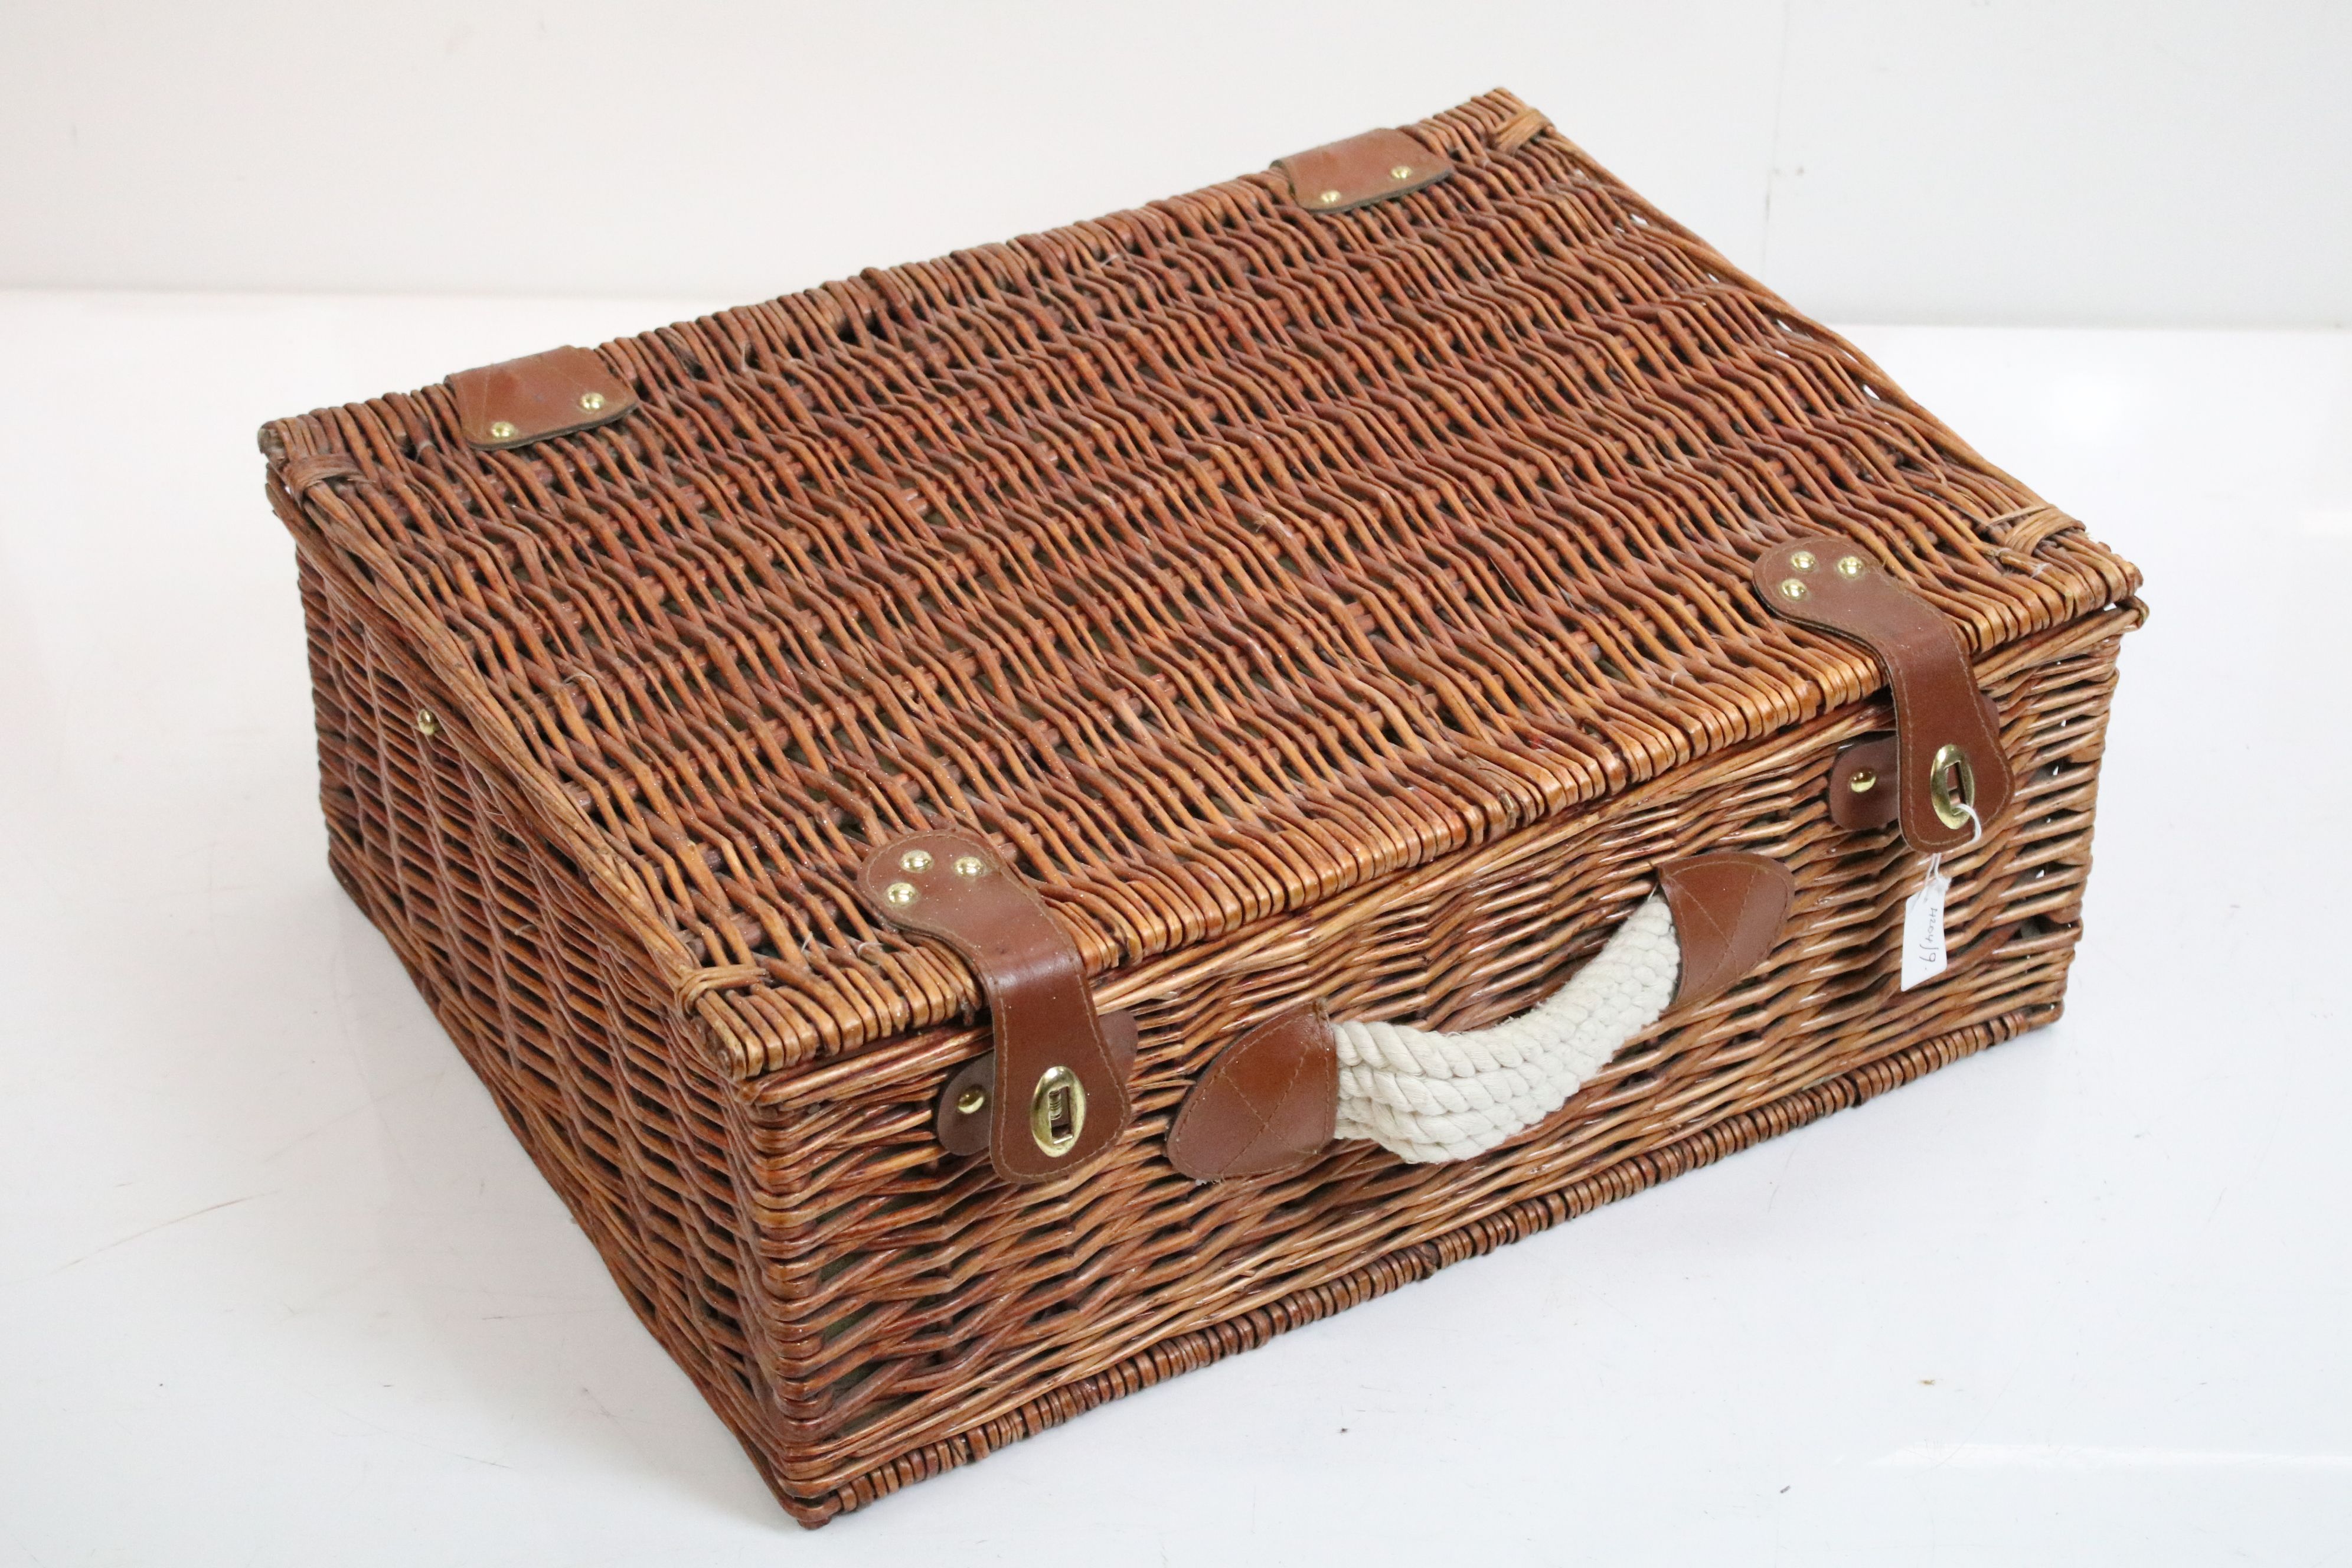 Four person picnic set in three wicker baskets, comprising cutlery, mugs, champagne glasses, - Image 6 of 7